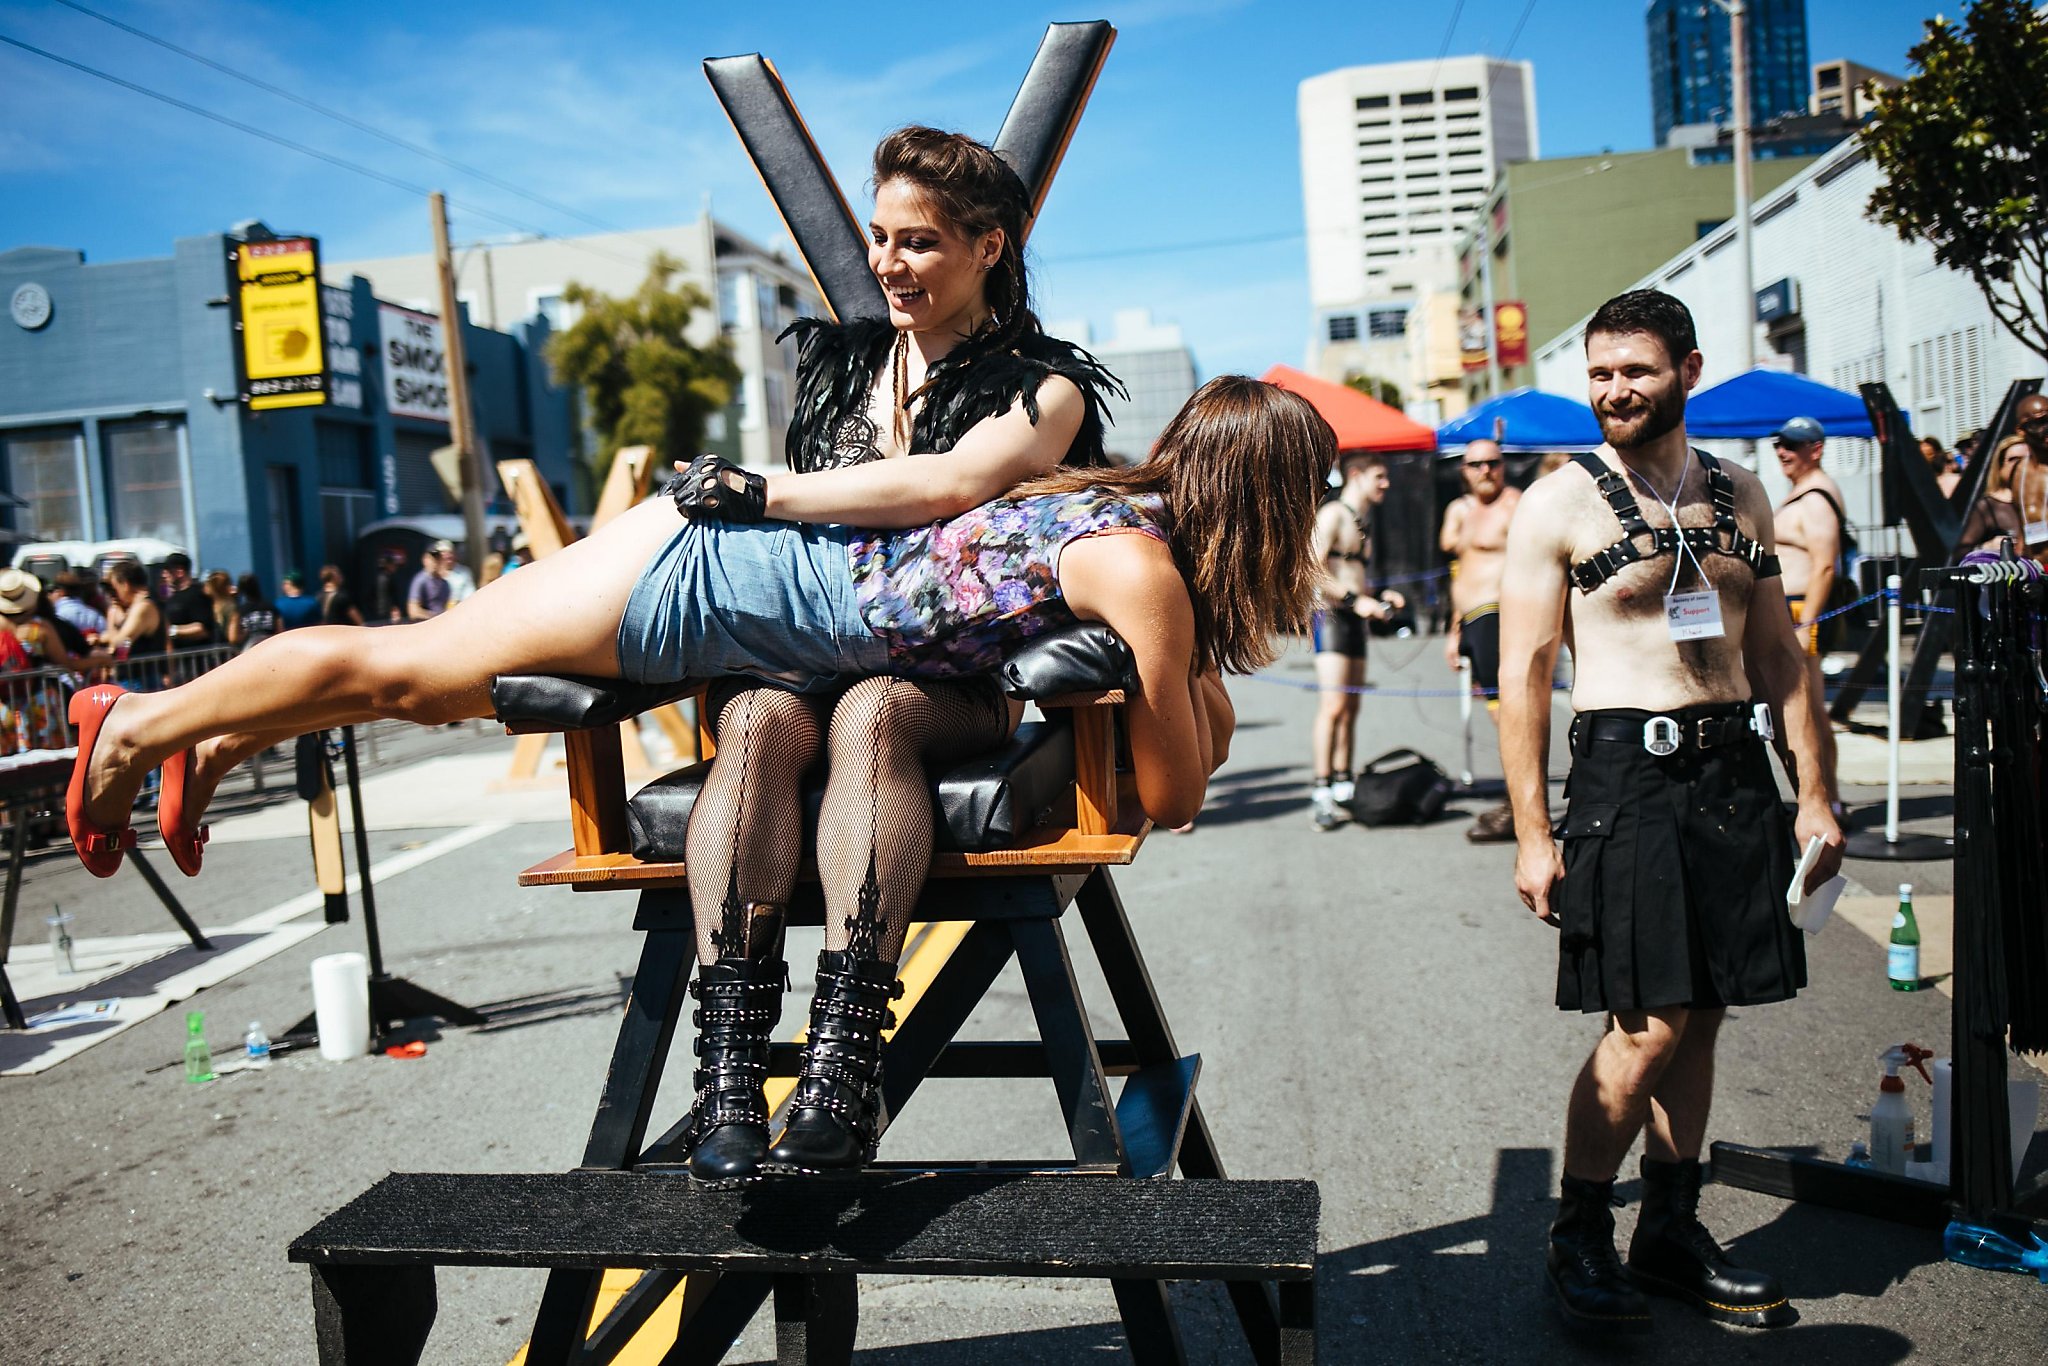 Thousands showed up Sunday to celebrate the Folsom Street Fair in San Franc...